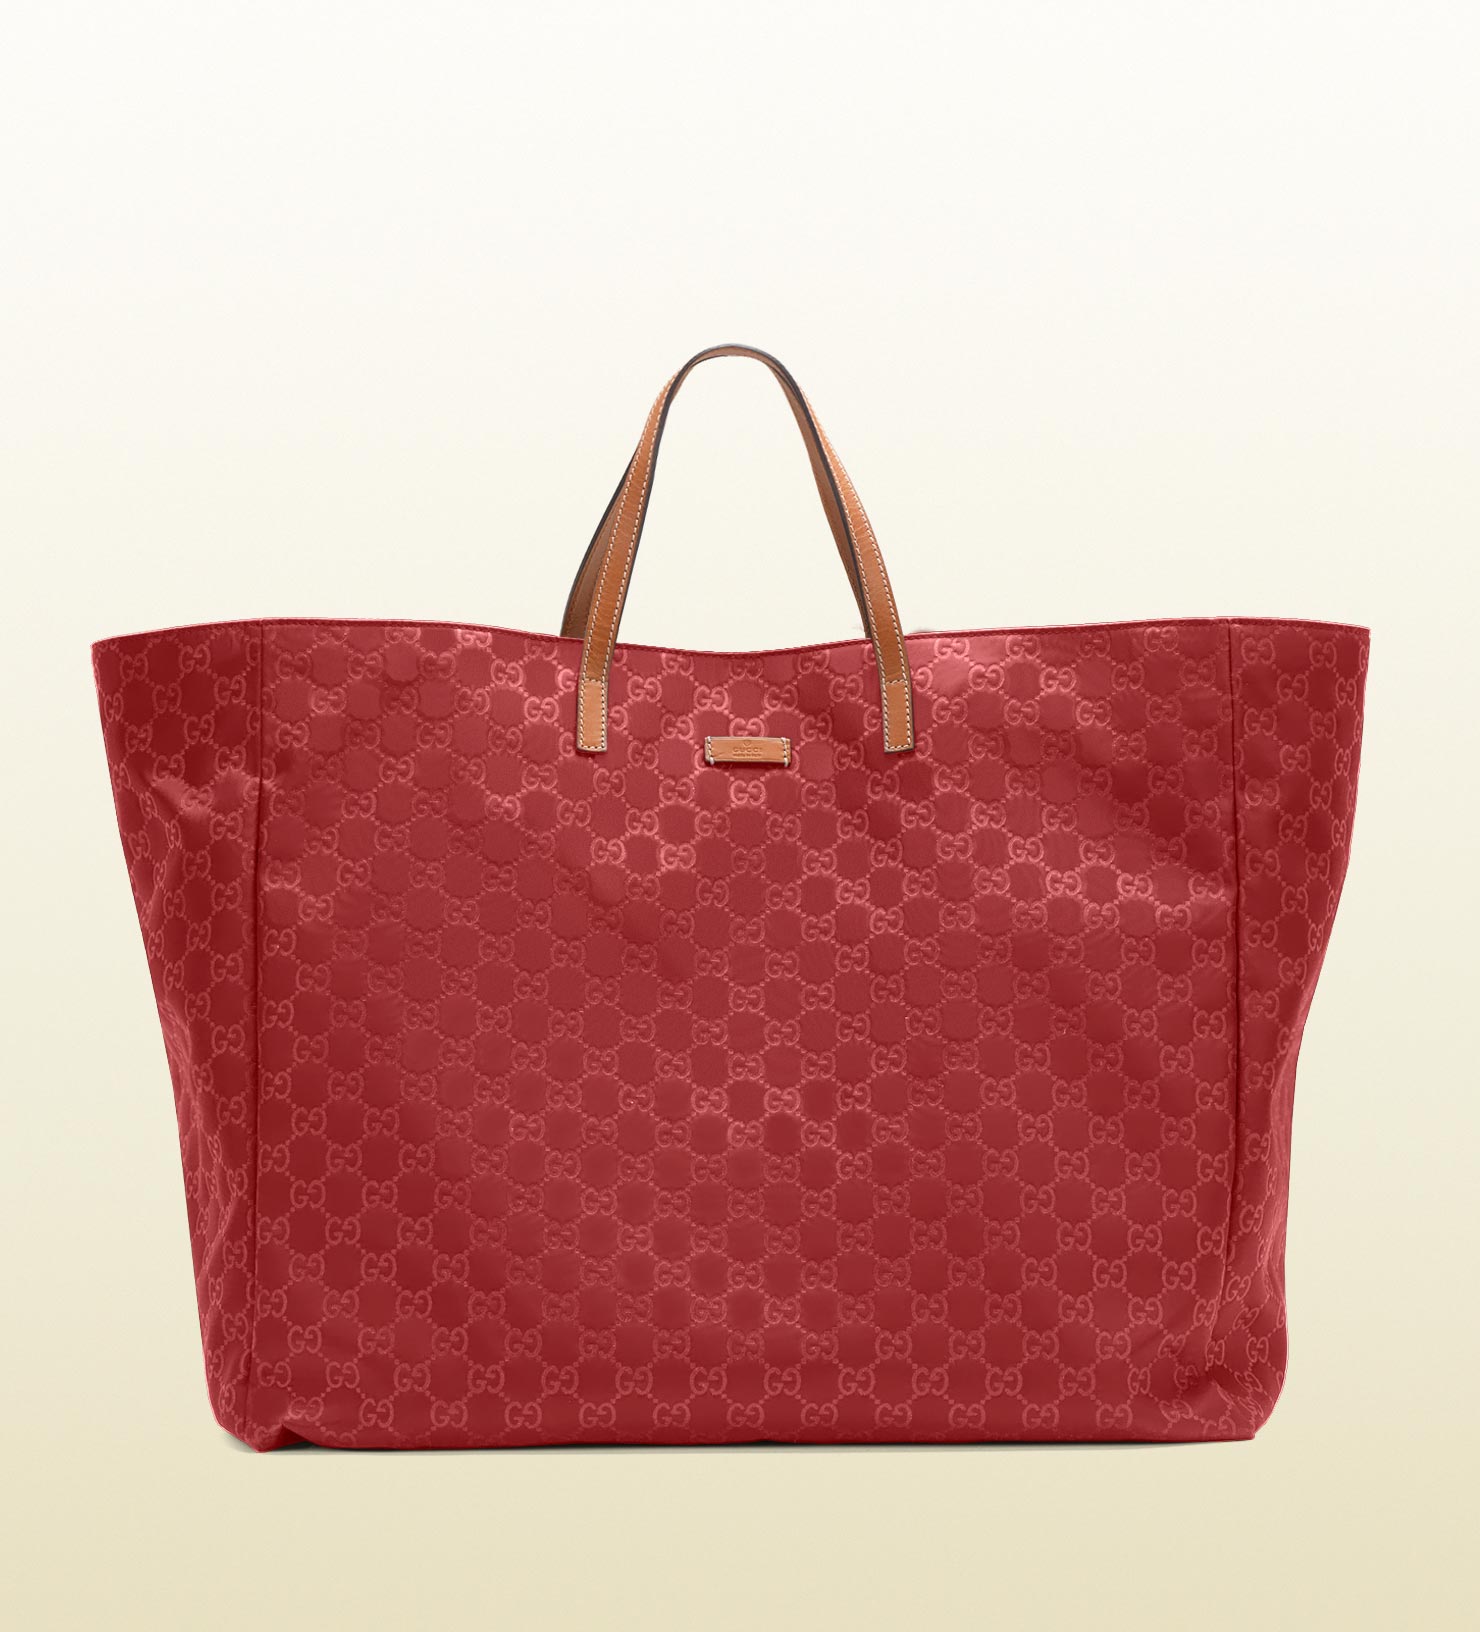 Lyst - Gucci Tote Bag in Red for Men